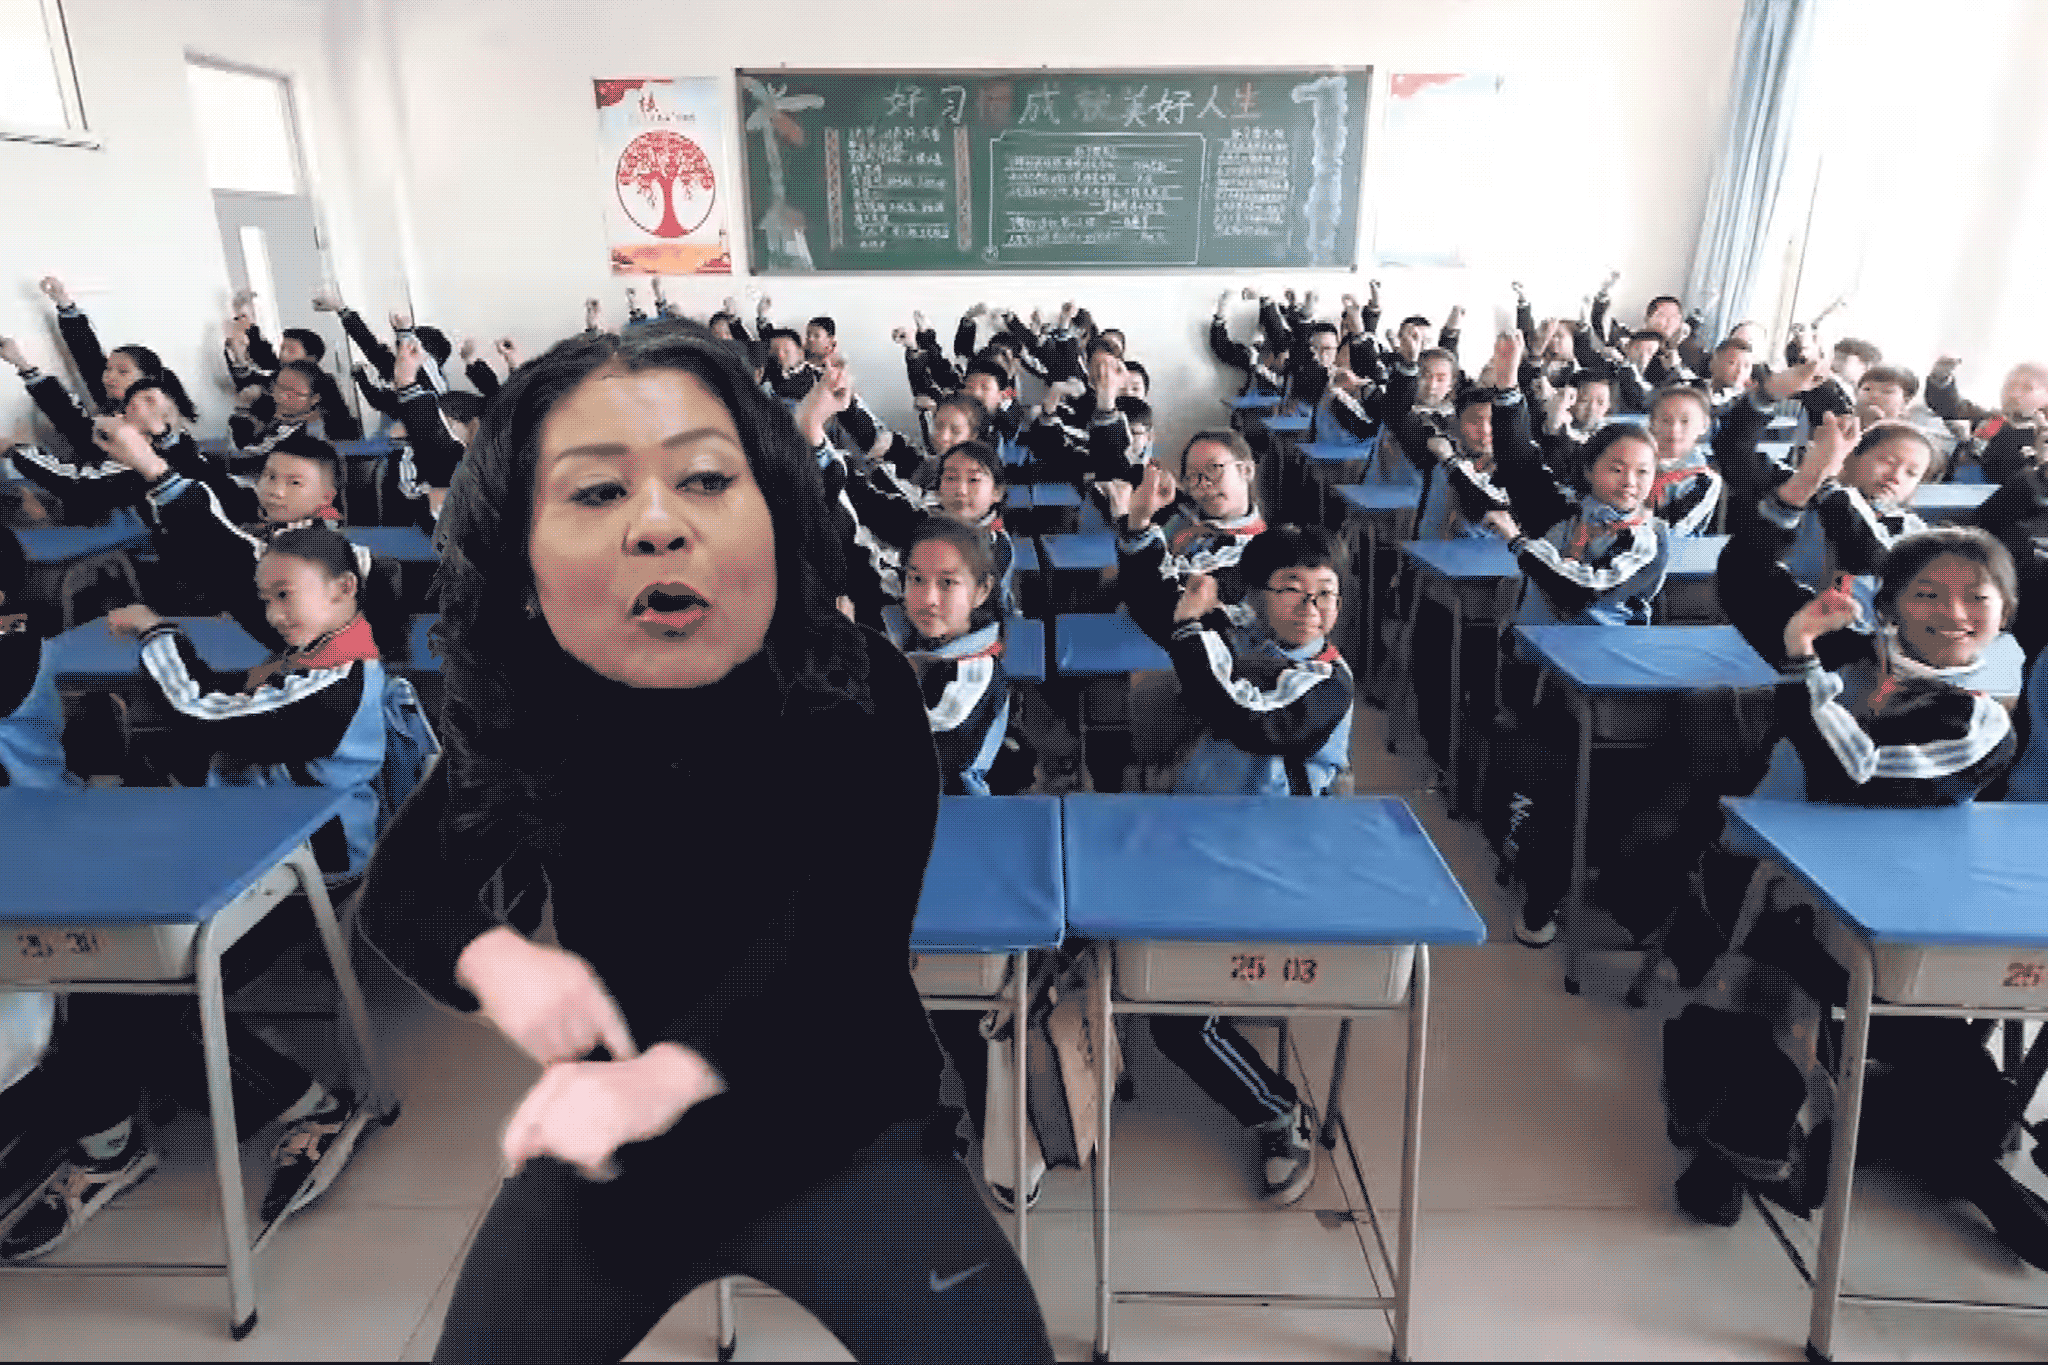 Gif of London Breed dancing along with a classroom of students in China